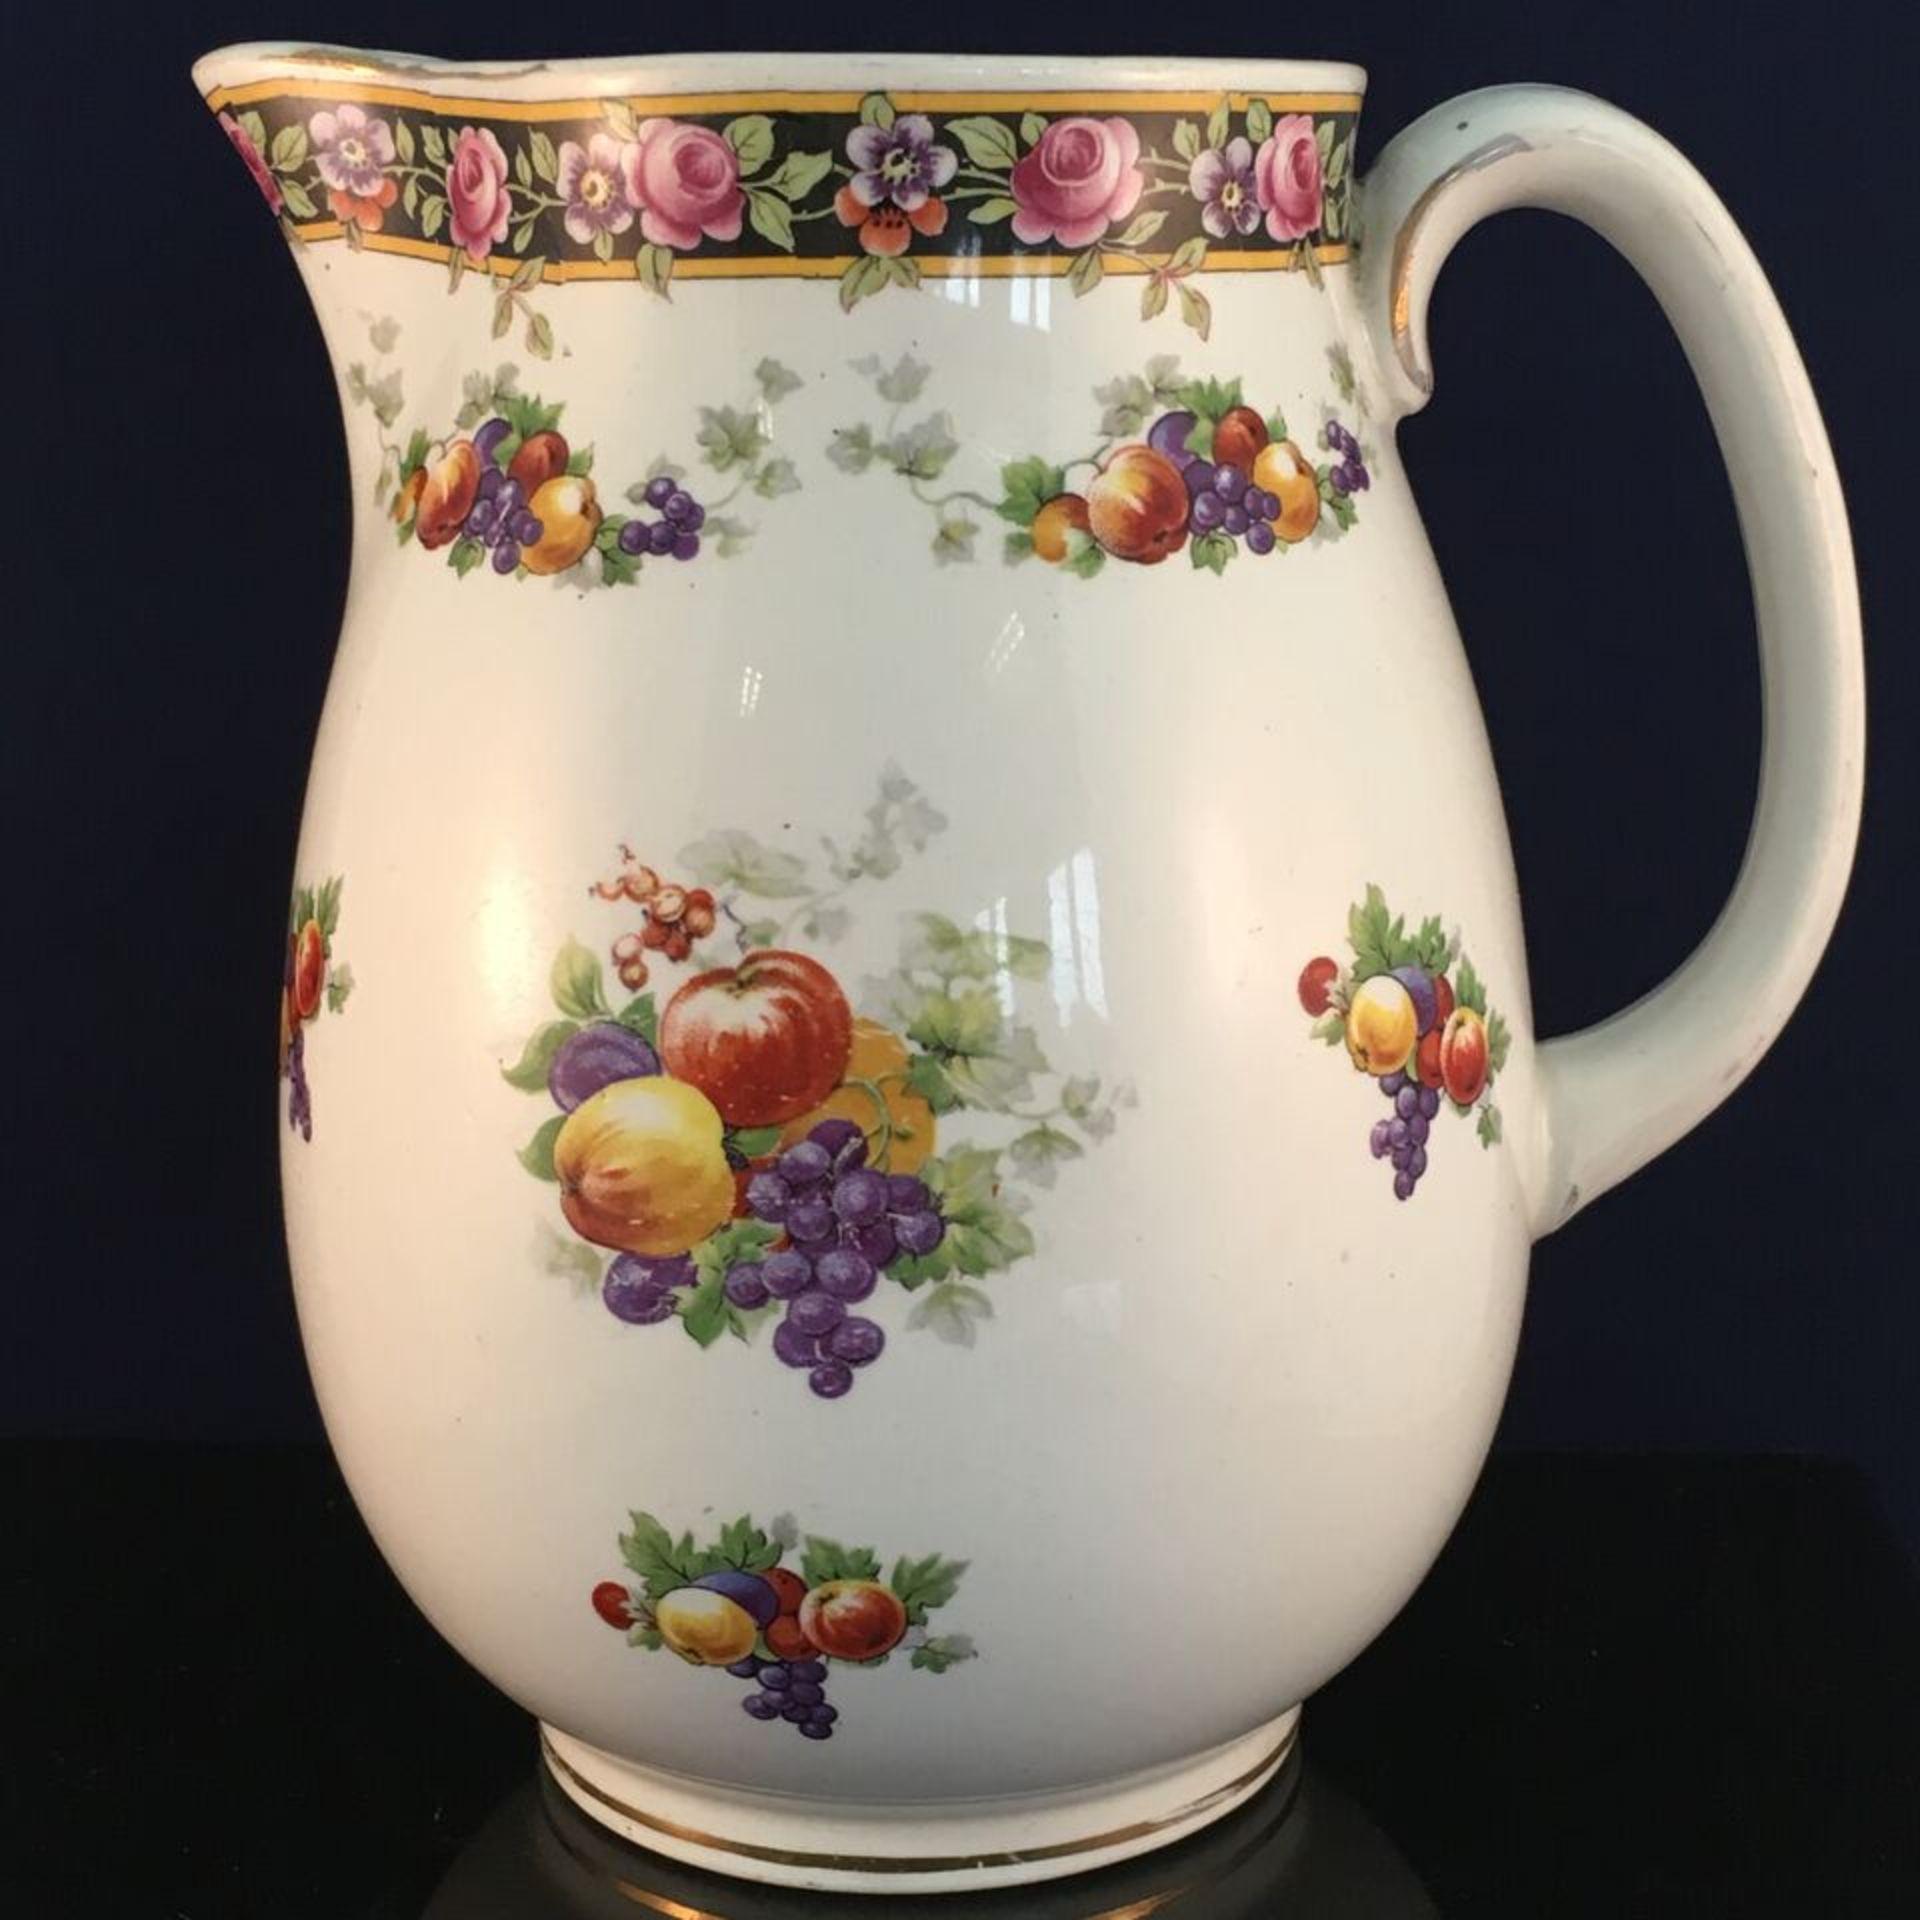 ANTIQUE LARGE WATER JUG WITH FRUIT AND FLORAL DECORATION. MEASURES 17CM HIGH. FREE UK DELIVERY. NO